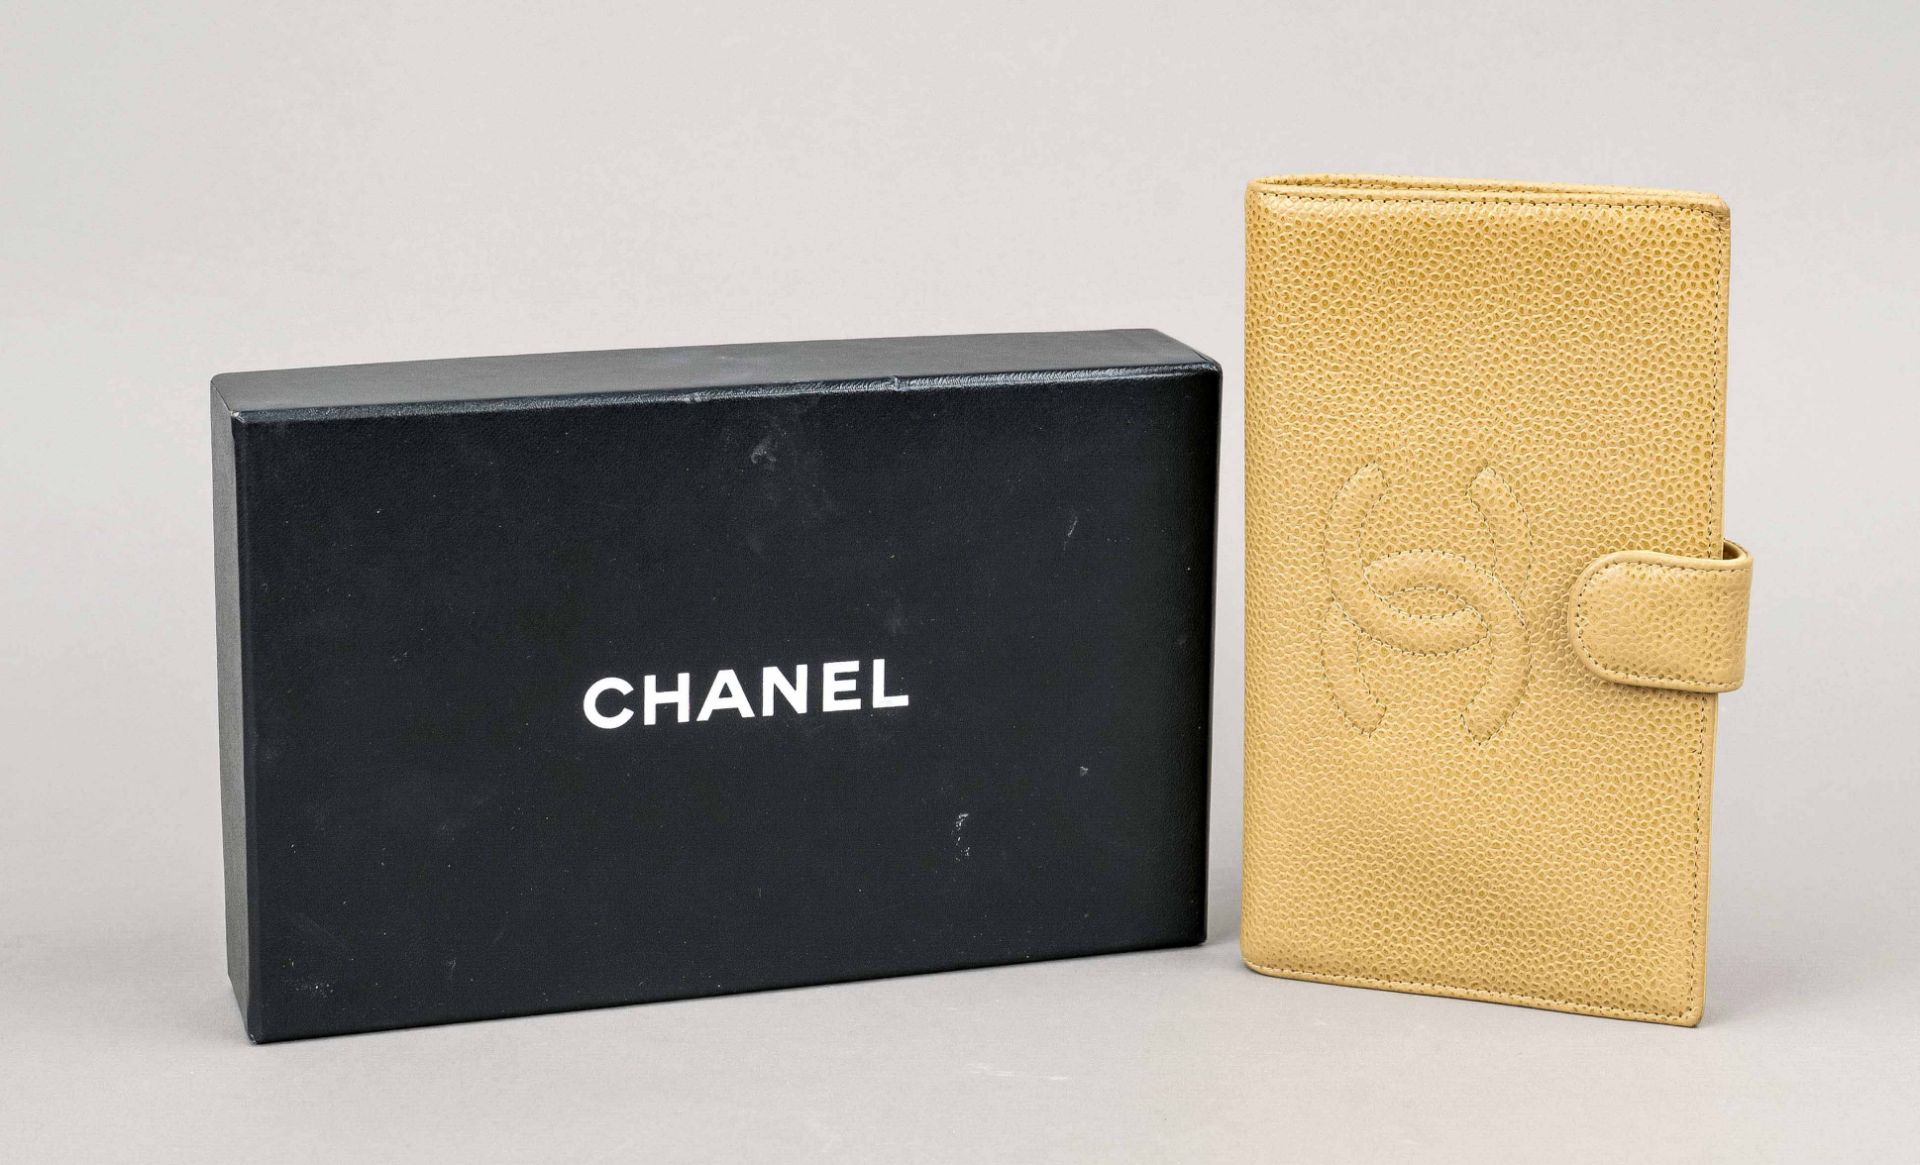 Chanel, Large Vintage Caviar Leather Wallet, caramel-colored caviar leather, gold-colored